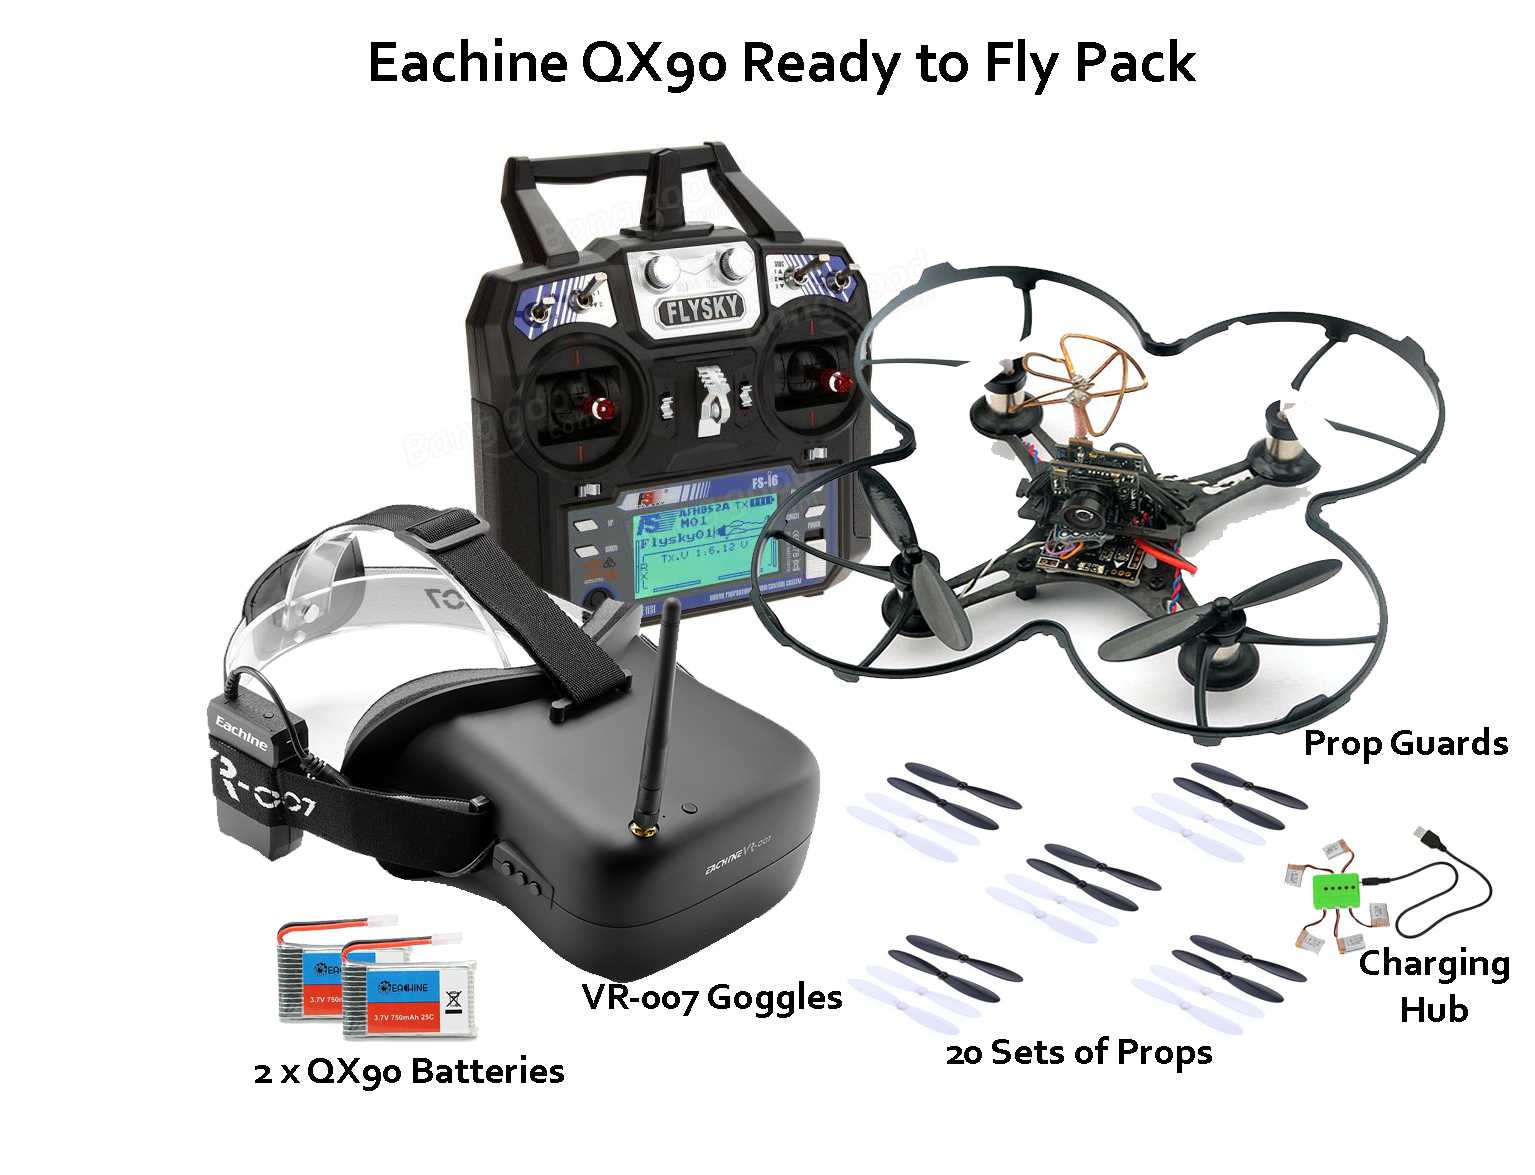 Eachine QX90 RTF package with goggles